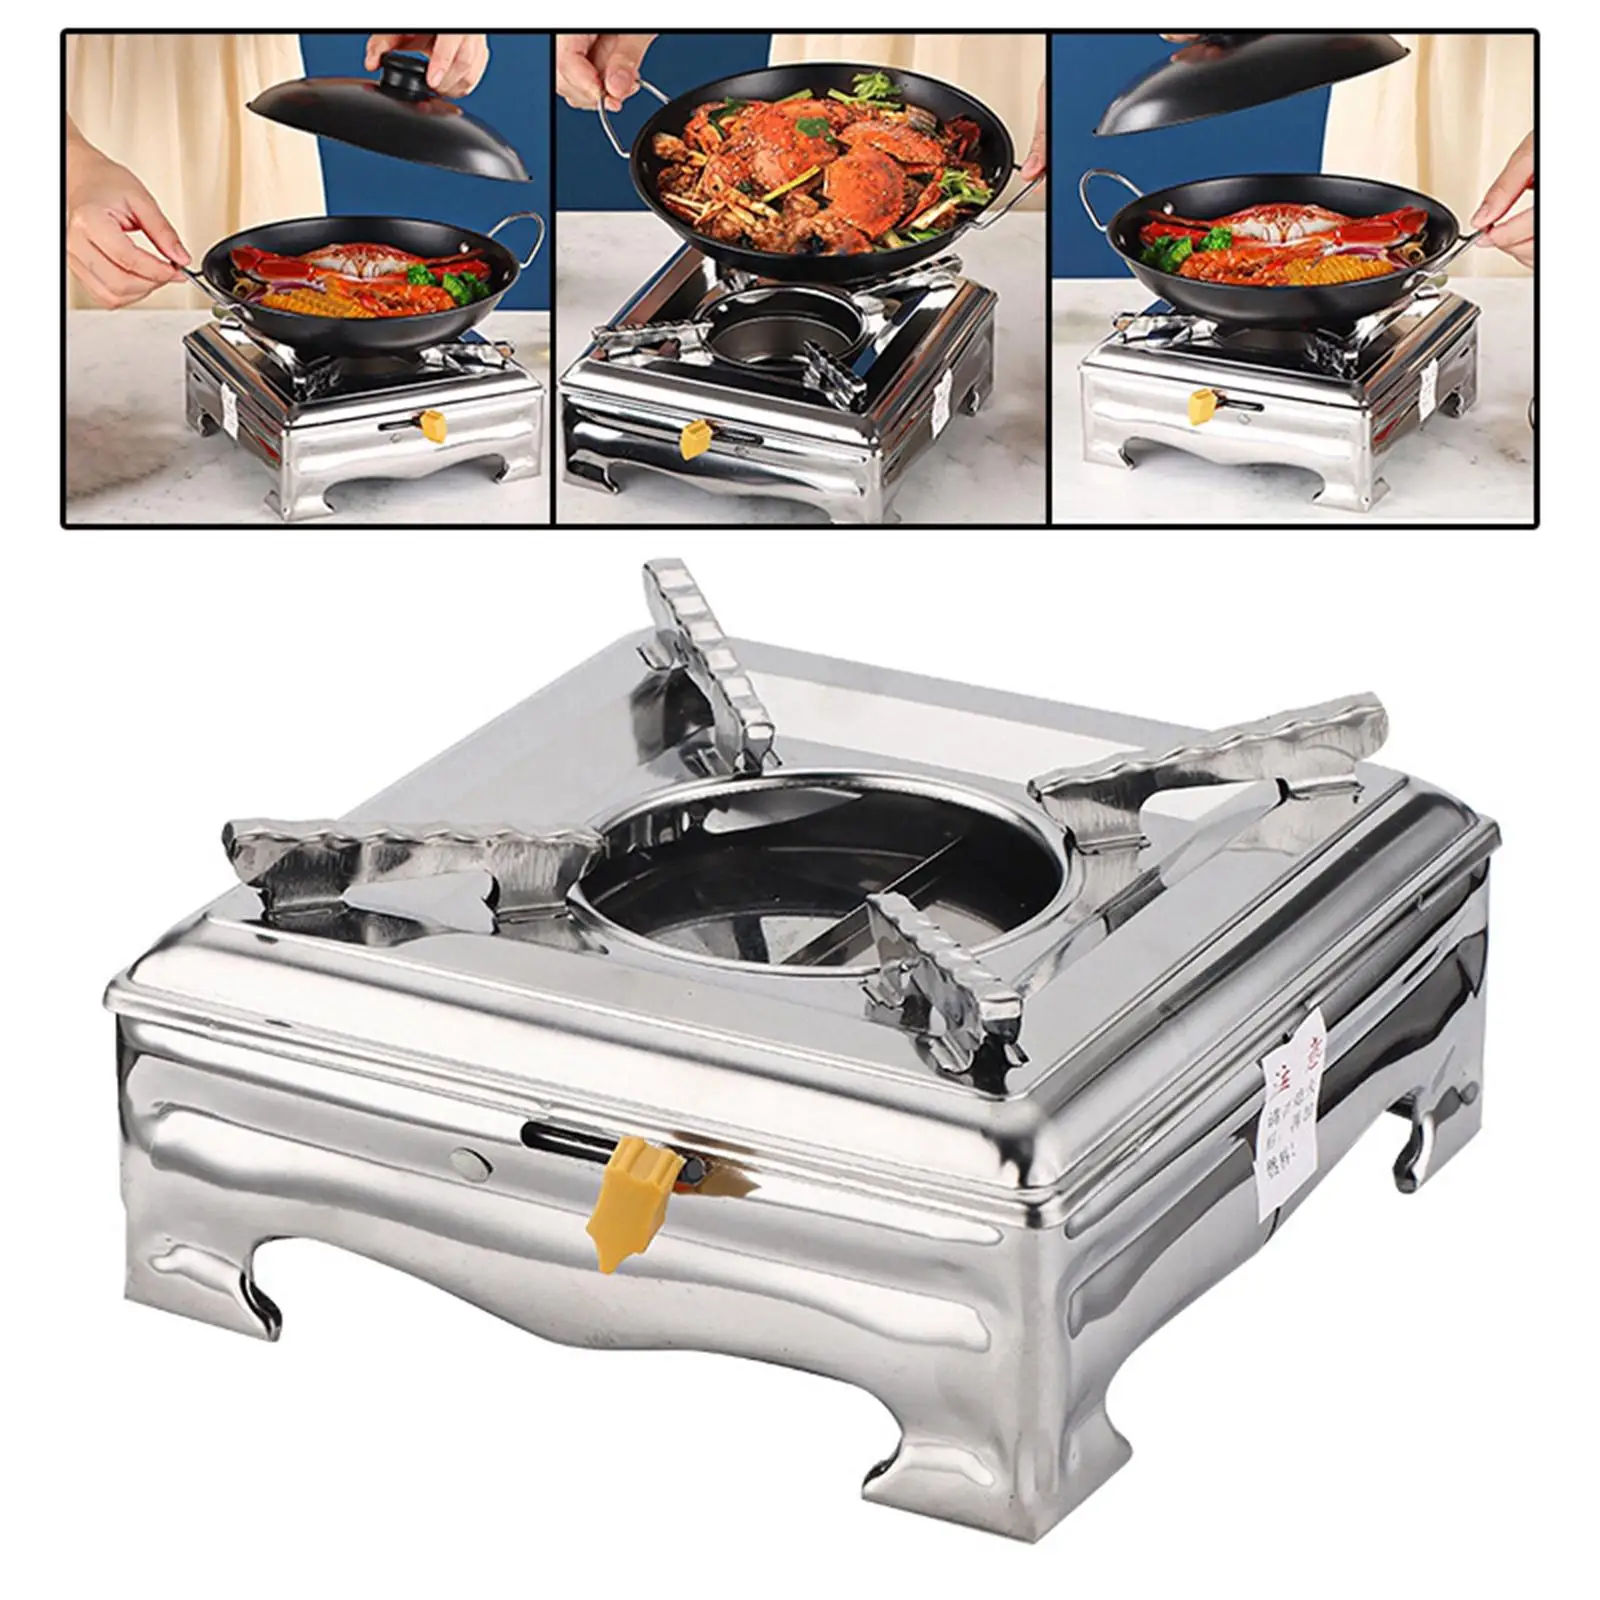 Alcohol Stove with Lid Heat Insulation Aluminum with Cover Lightweight Burner